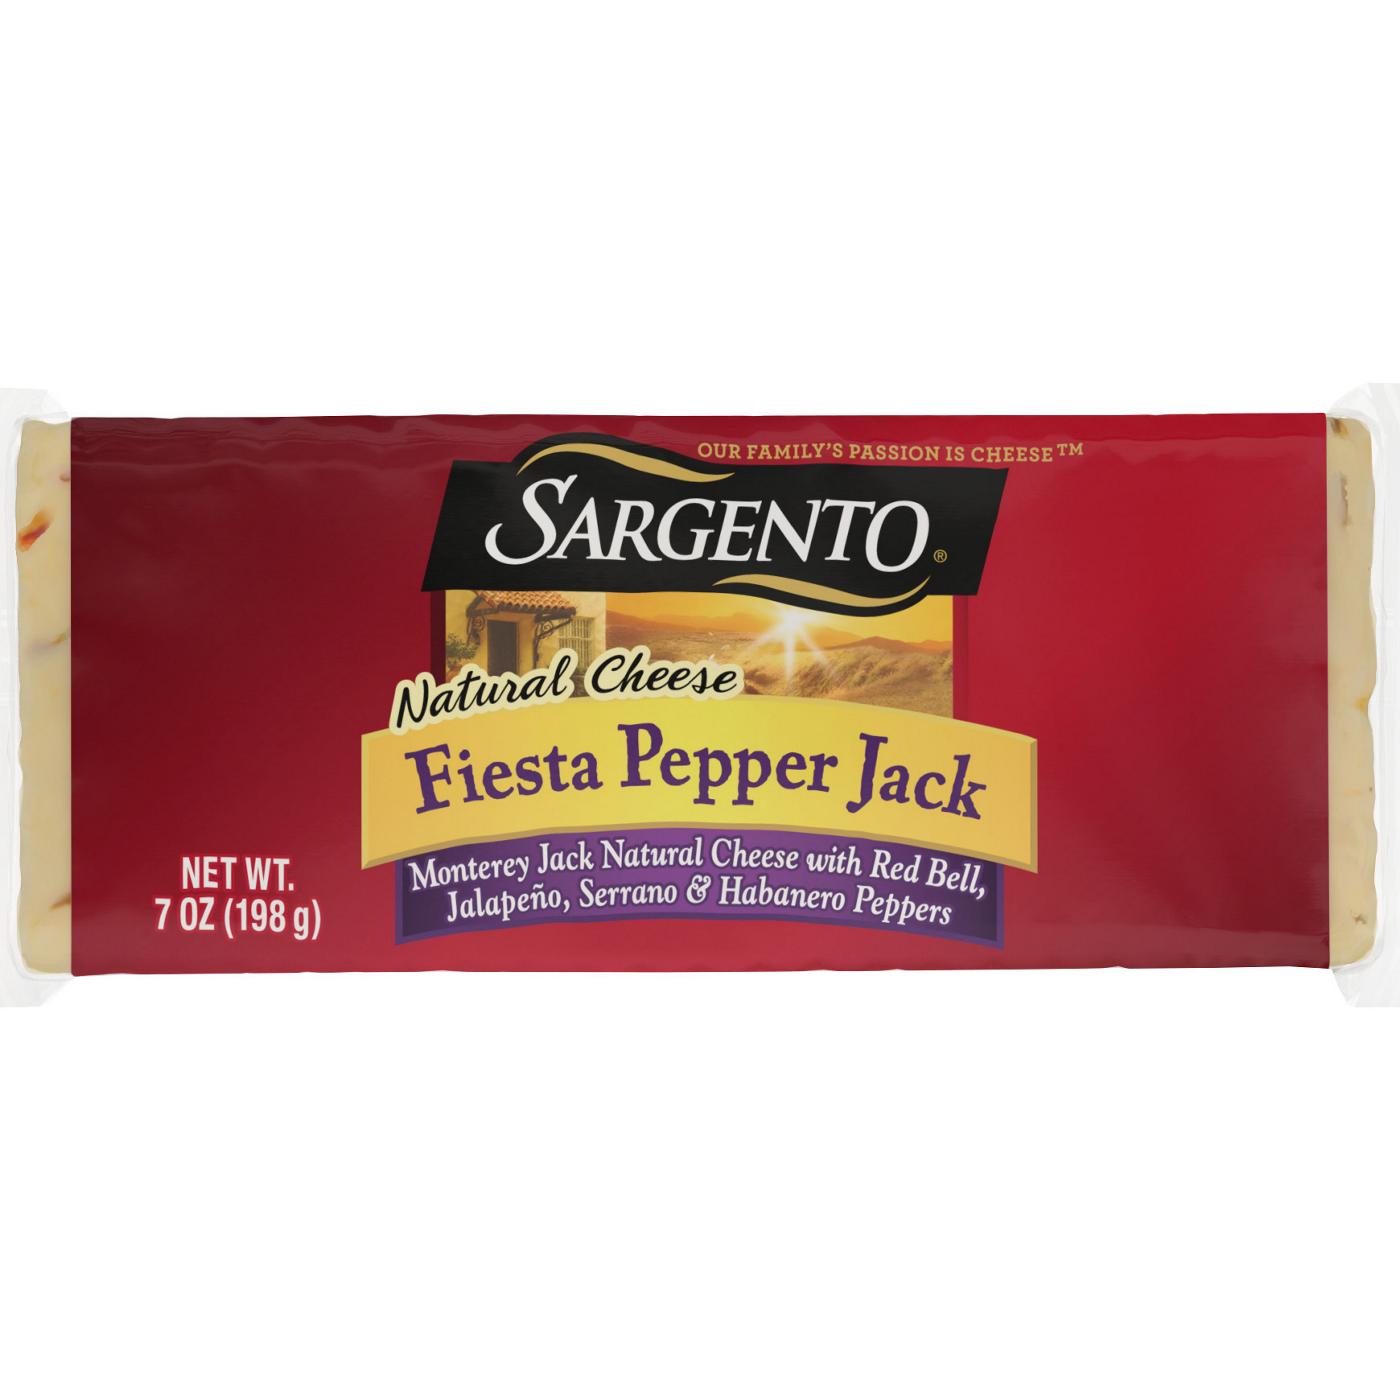 SARGENTO Fiesta Pepper Jack Cheese; image 1 of 2